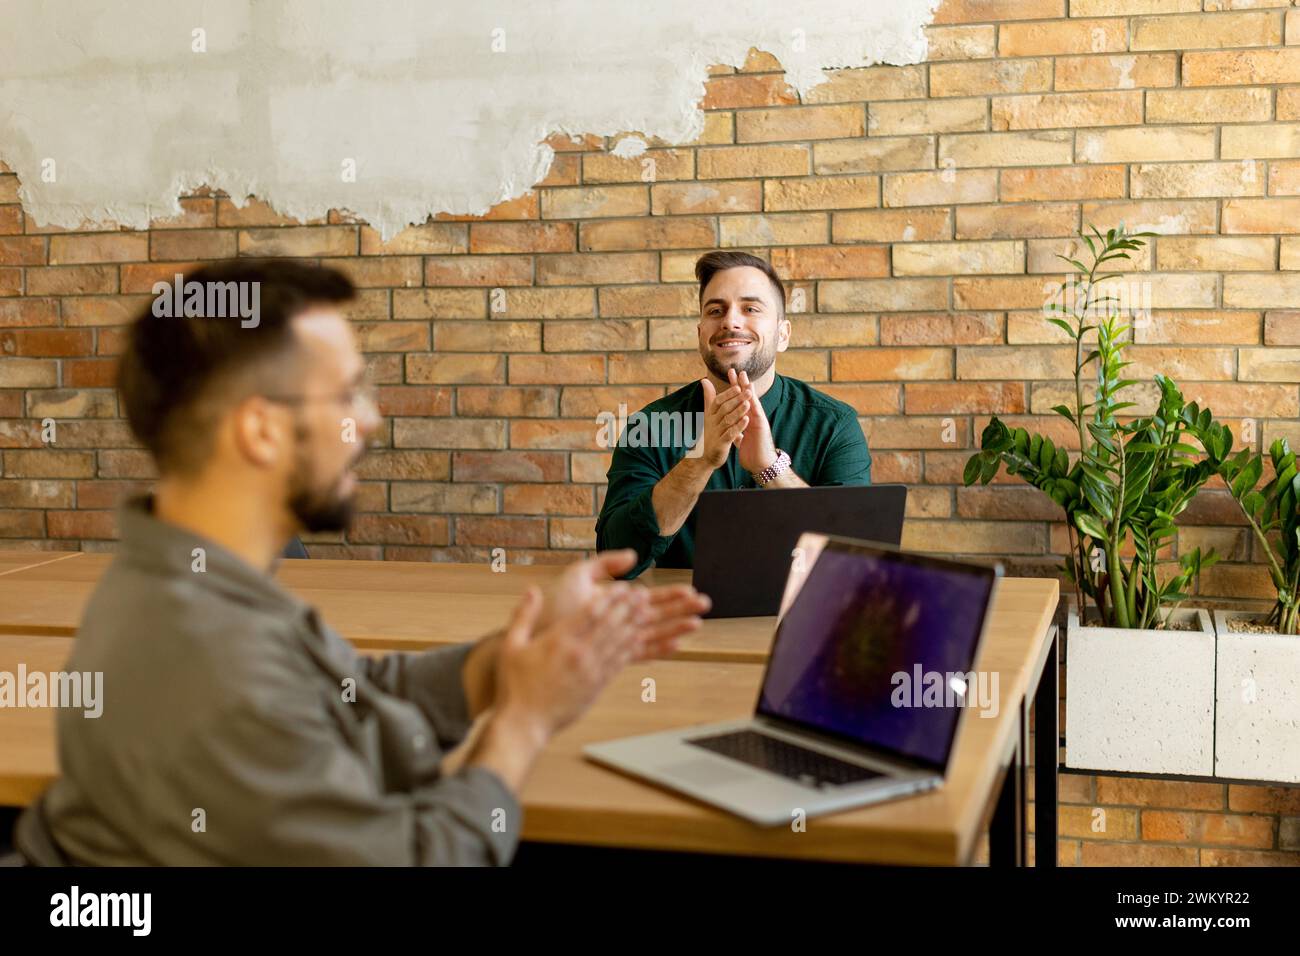 Two smiling professionals engage in a collaborative work session at a wooden table, their camaraderie evident in a contemporary office setting with an Stock Photo